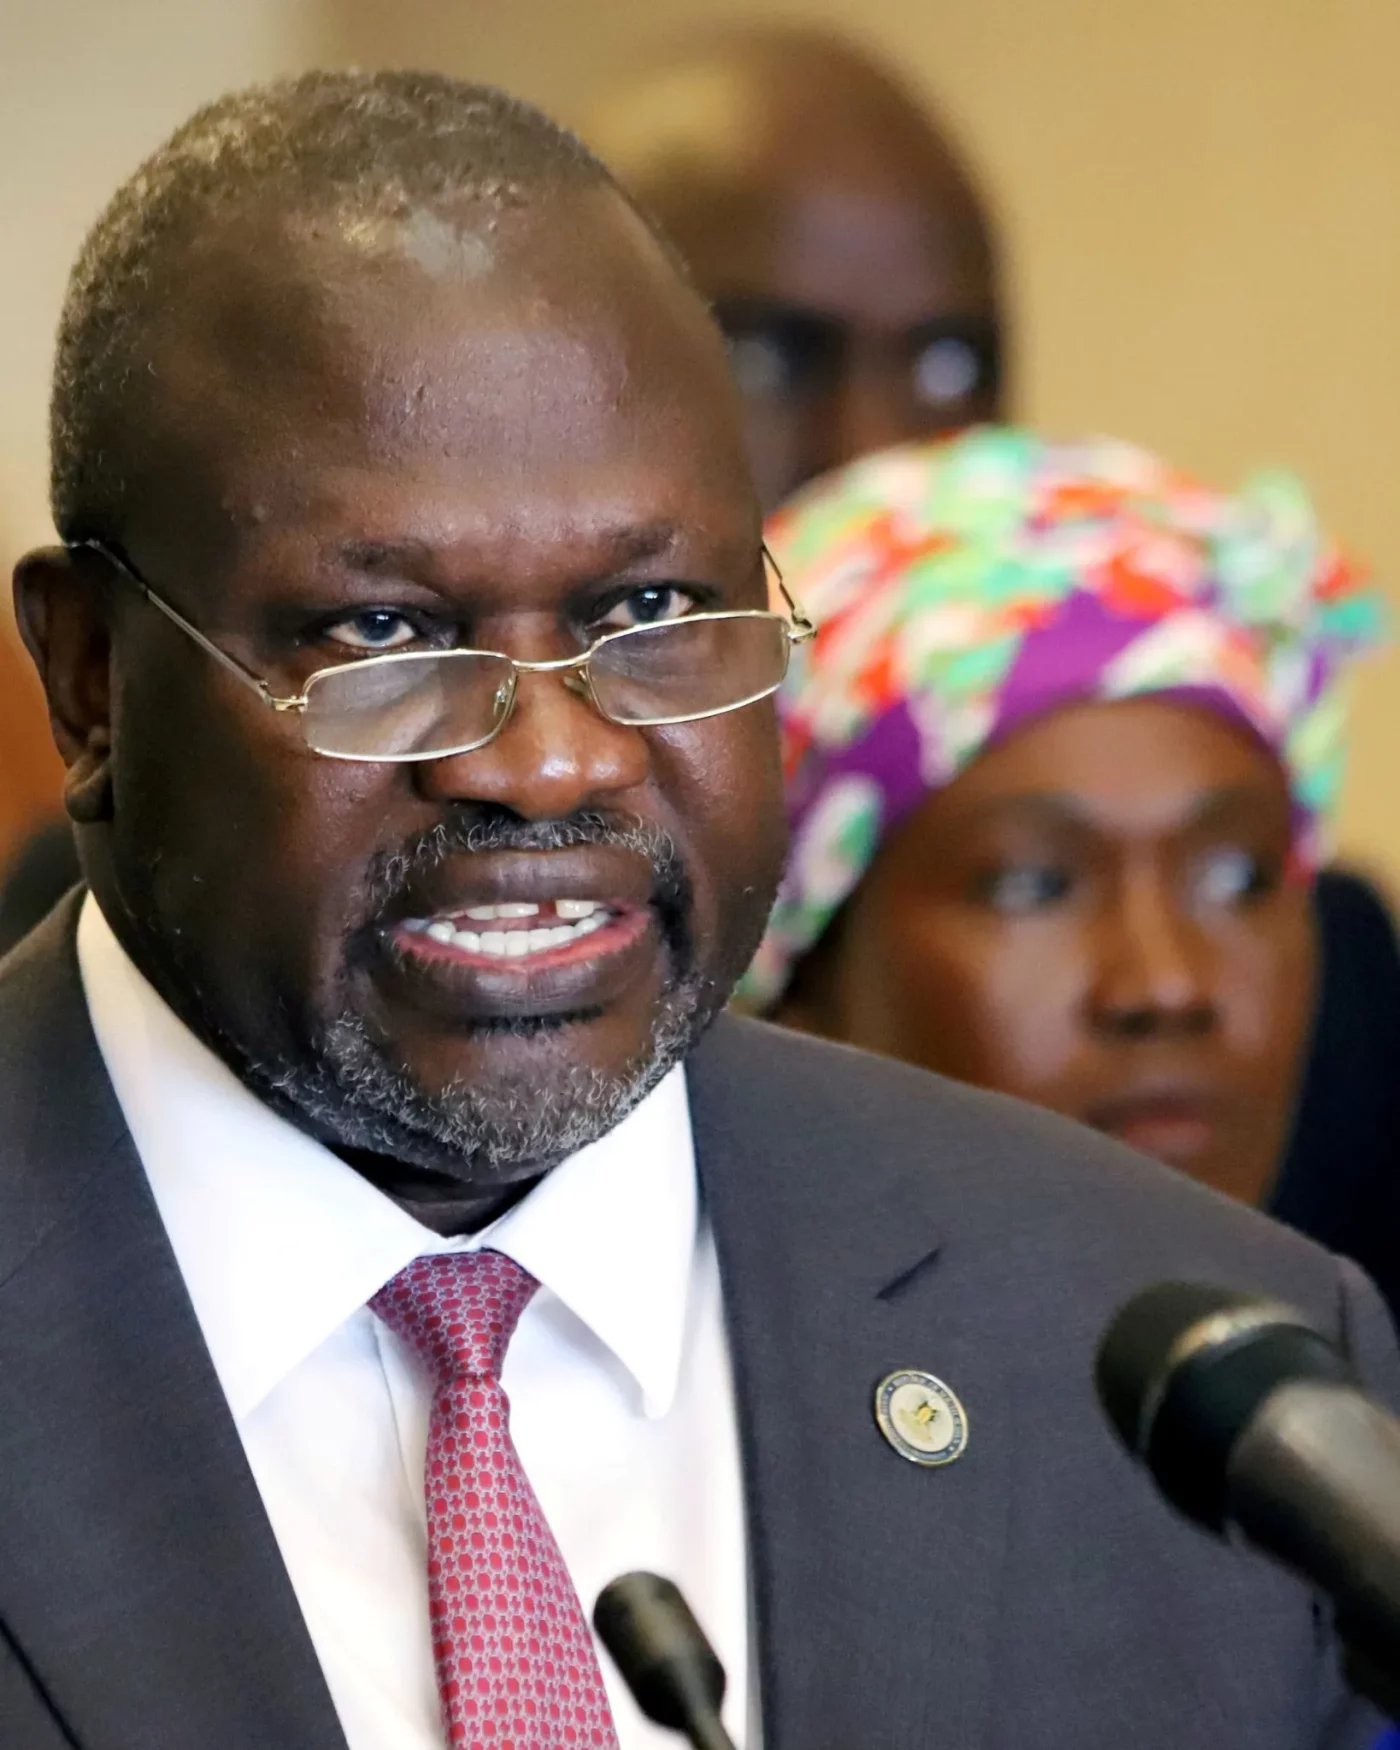 First Vice President’s group rejects president Kiir’s decree on unification of forces